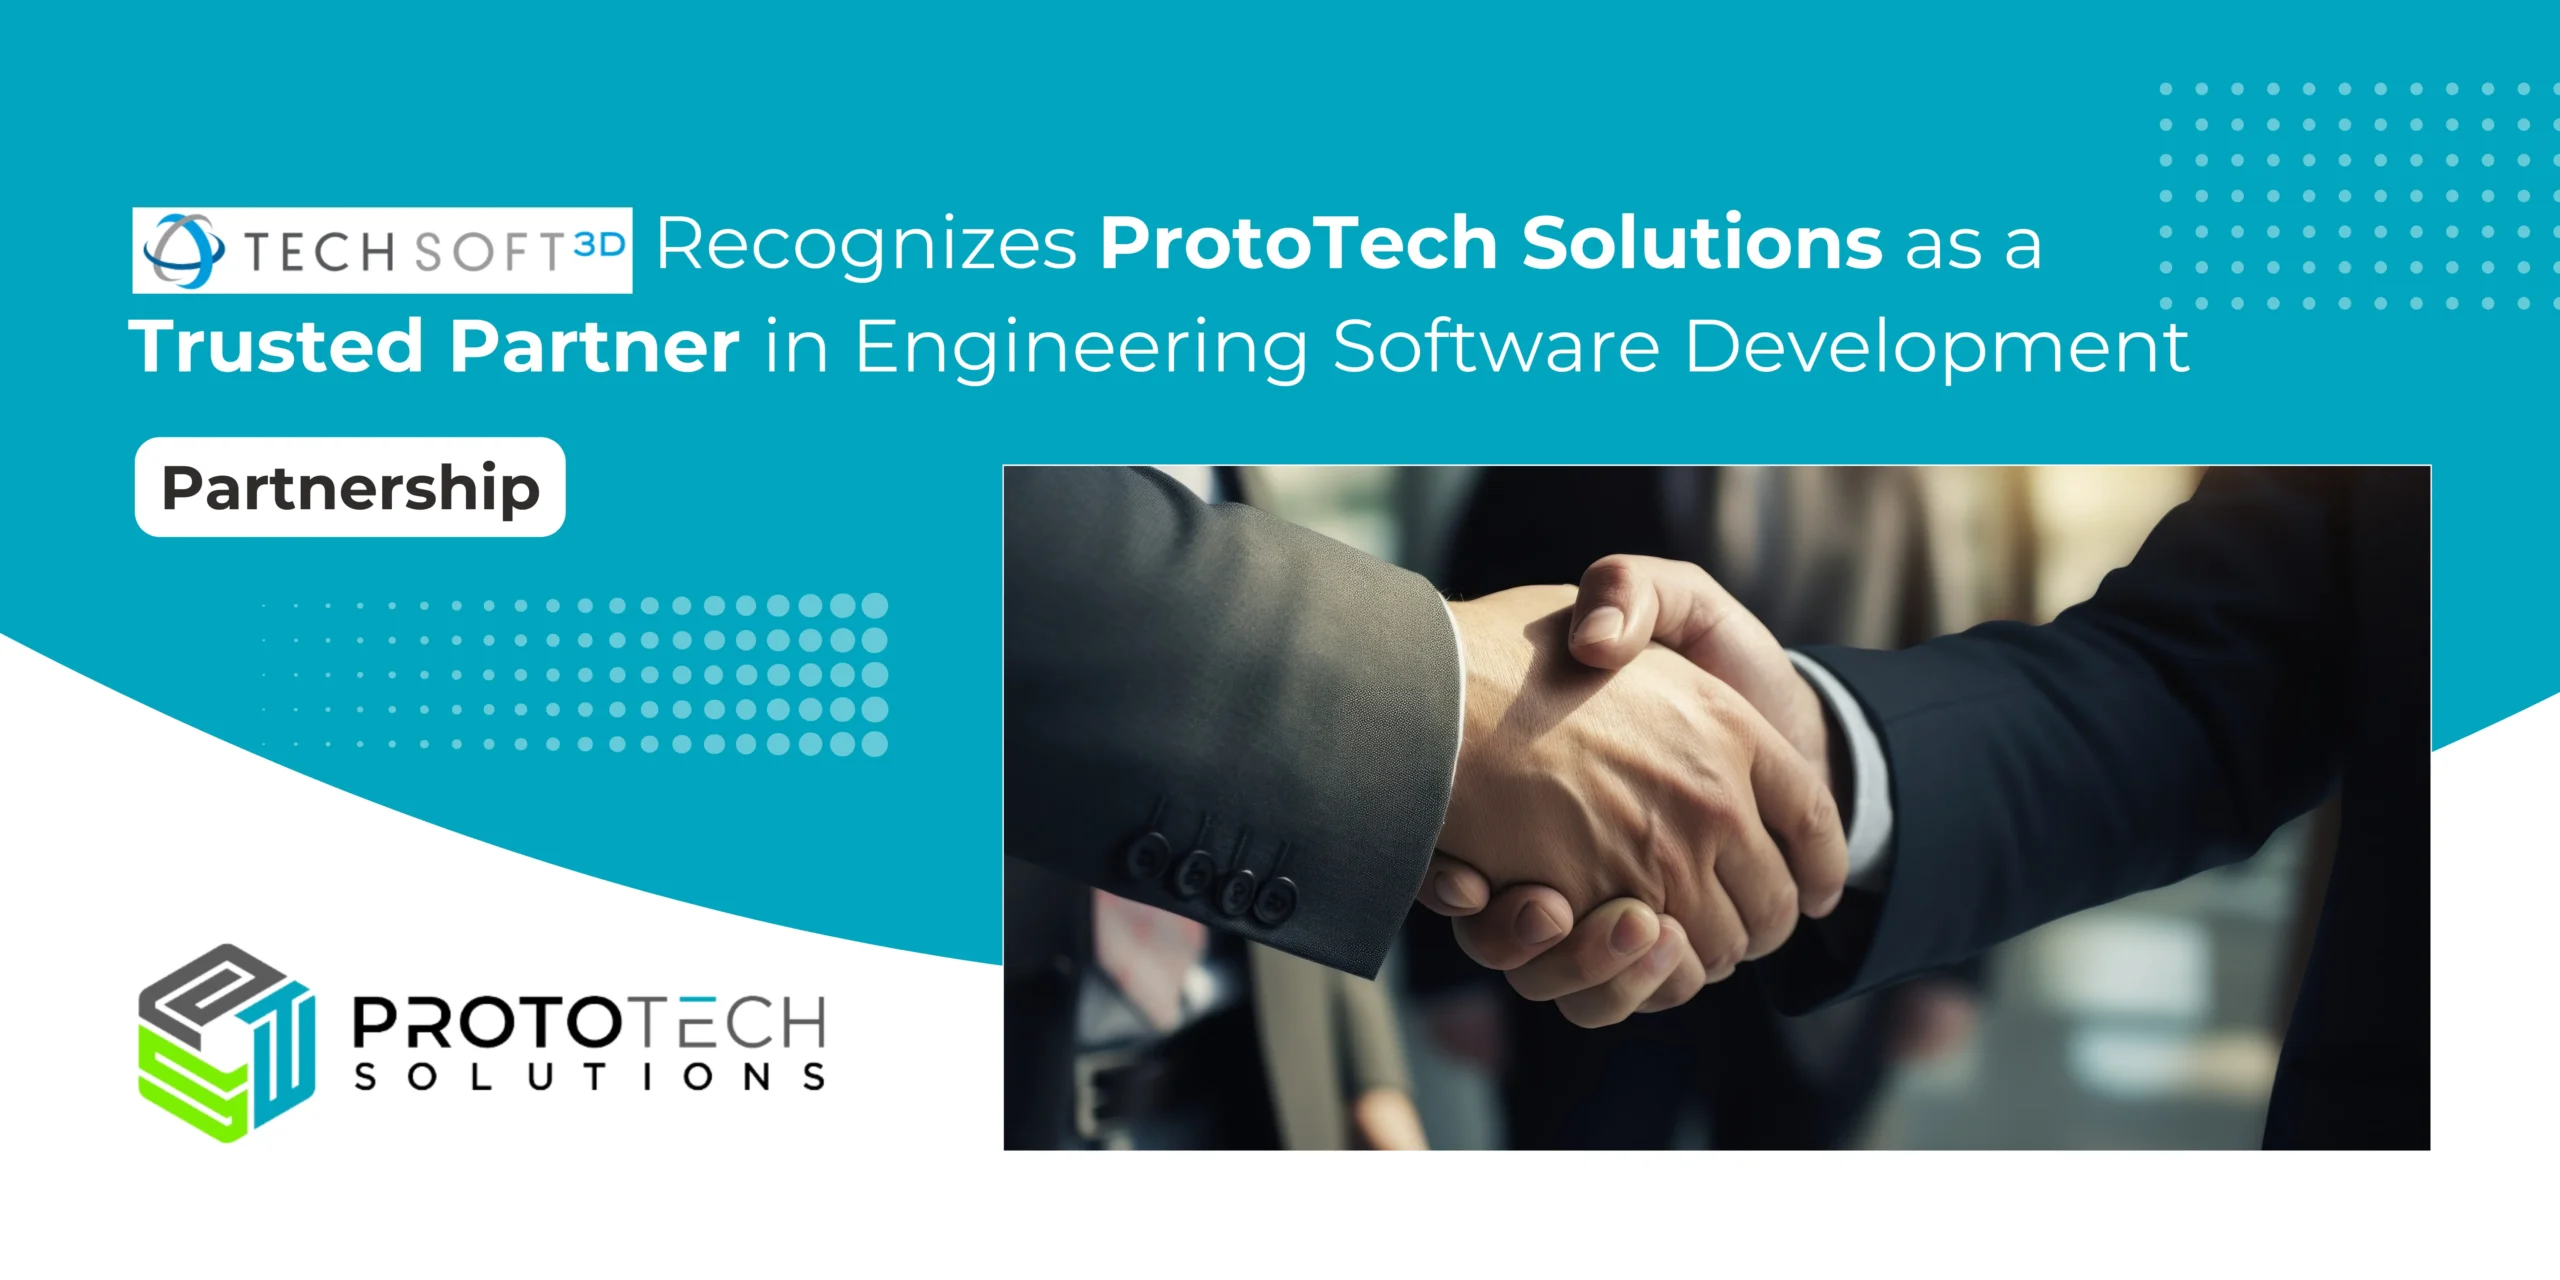 Tech Soft 3D Recognizes ProtoTech Solutions as a Trusted Partner in Engineering Software Development